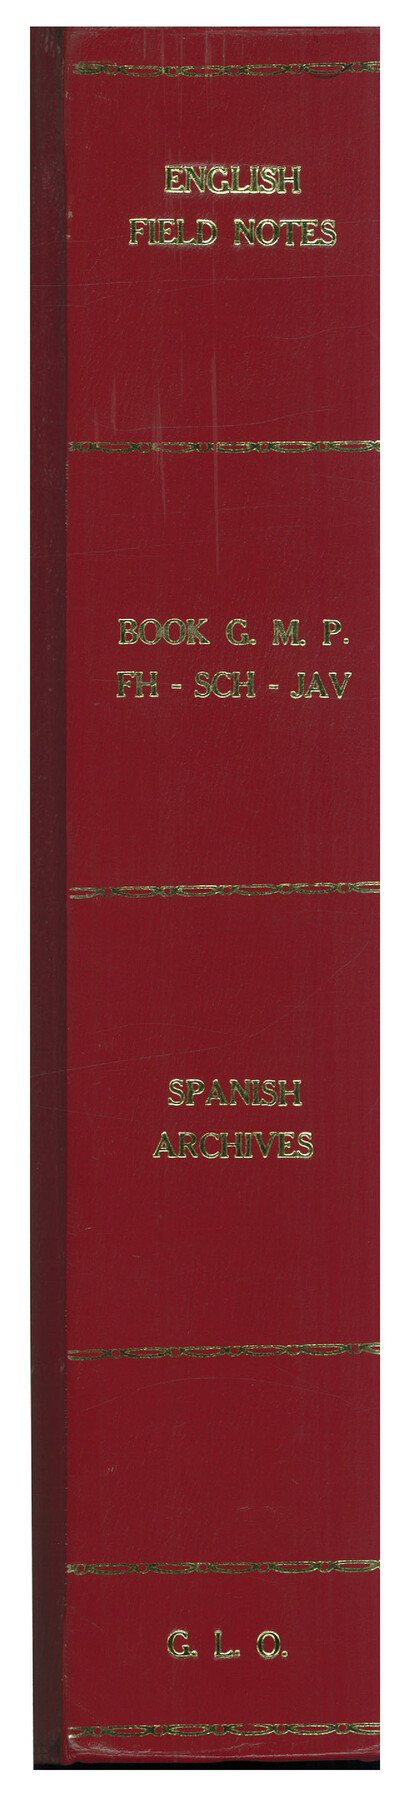 96545, English Field Notes of the Spanish Archives - Books GMP, FH, SCH, and JAV, Historical Volumes